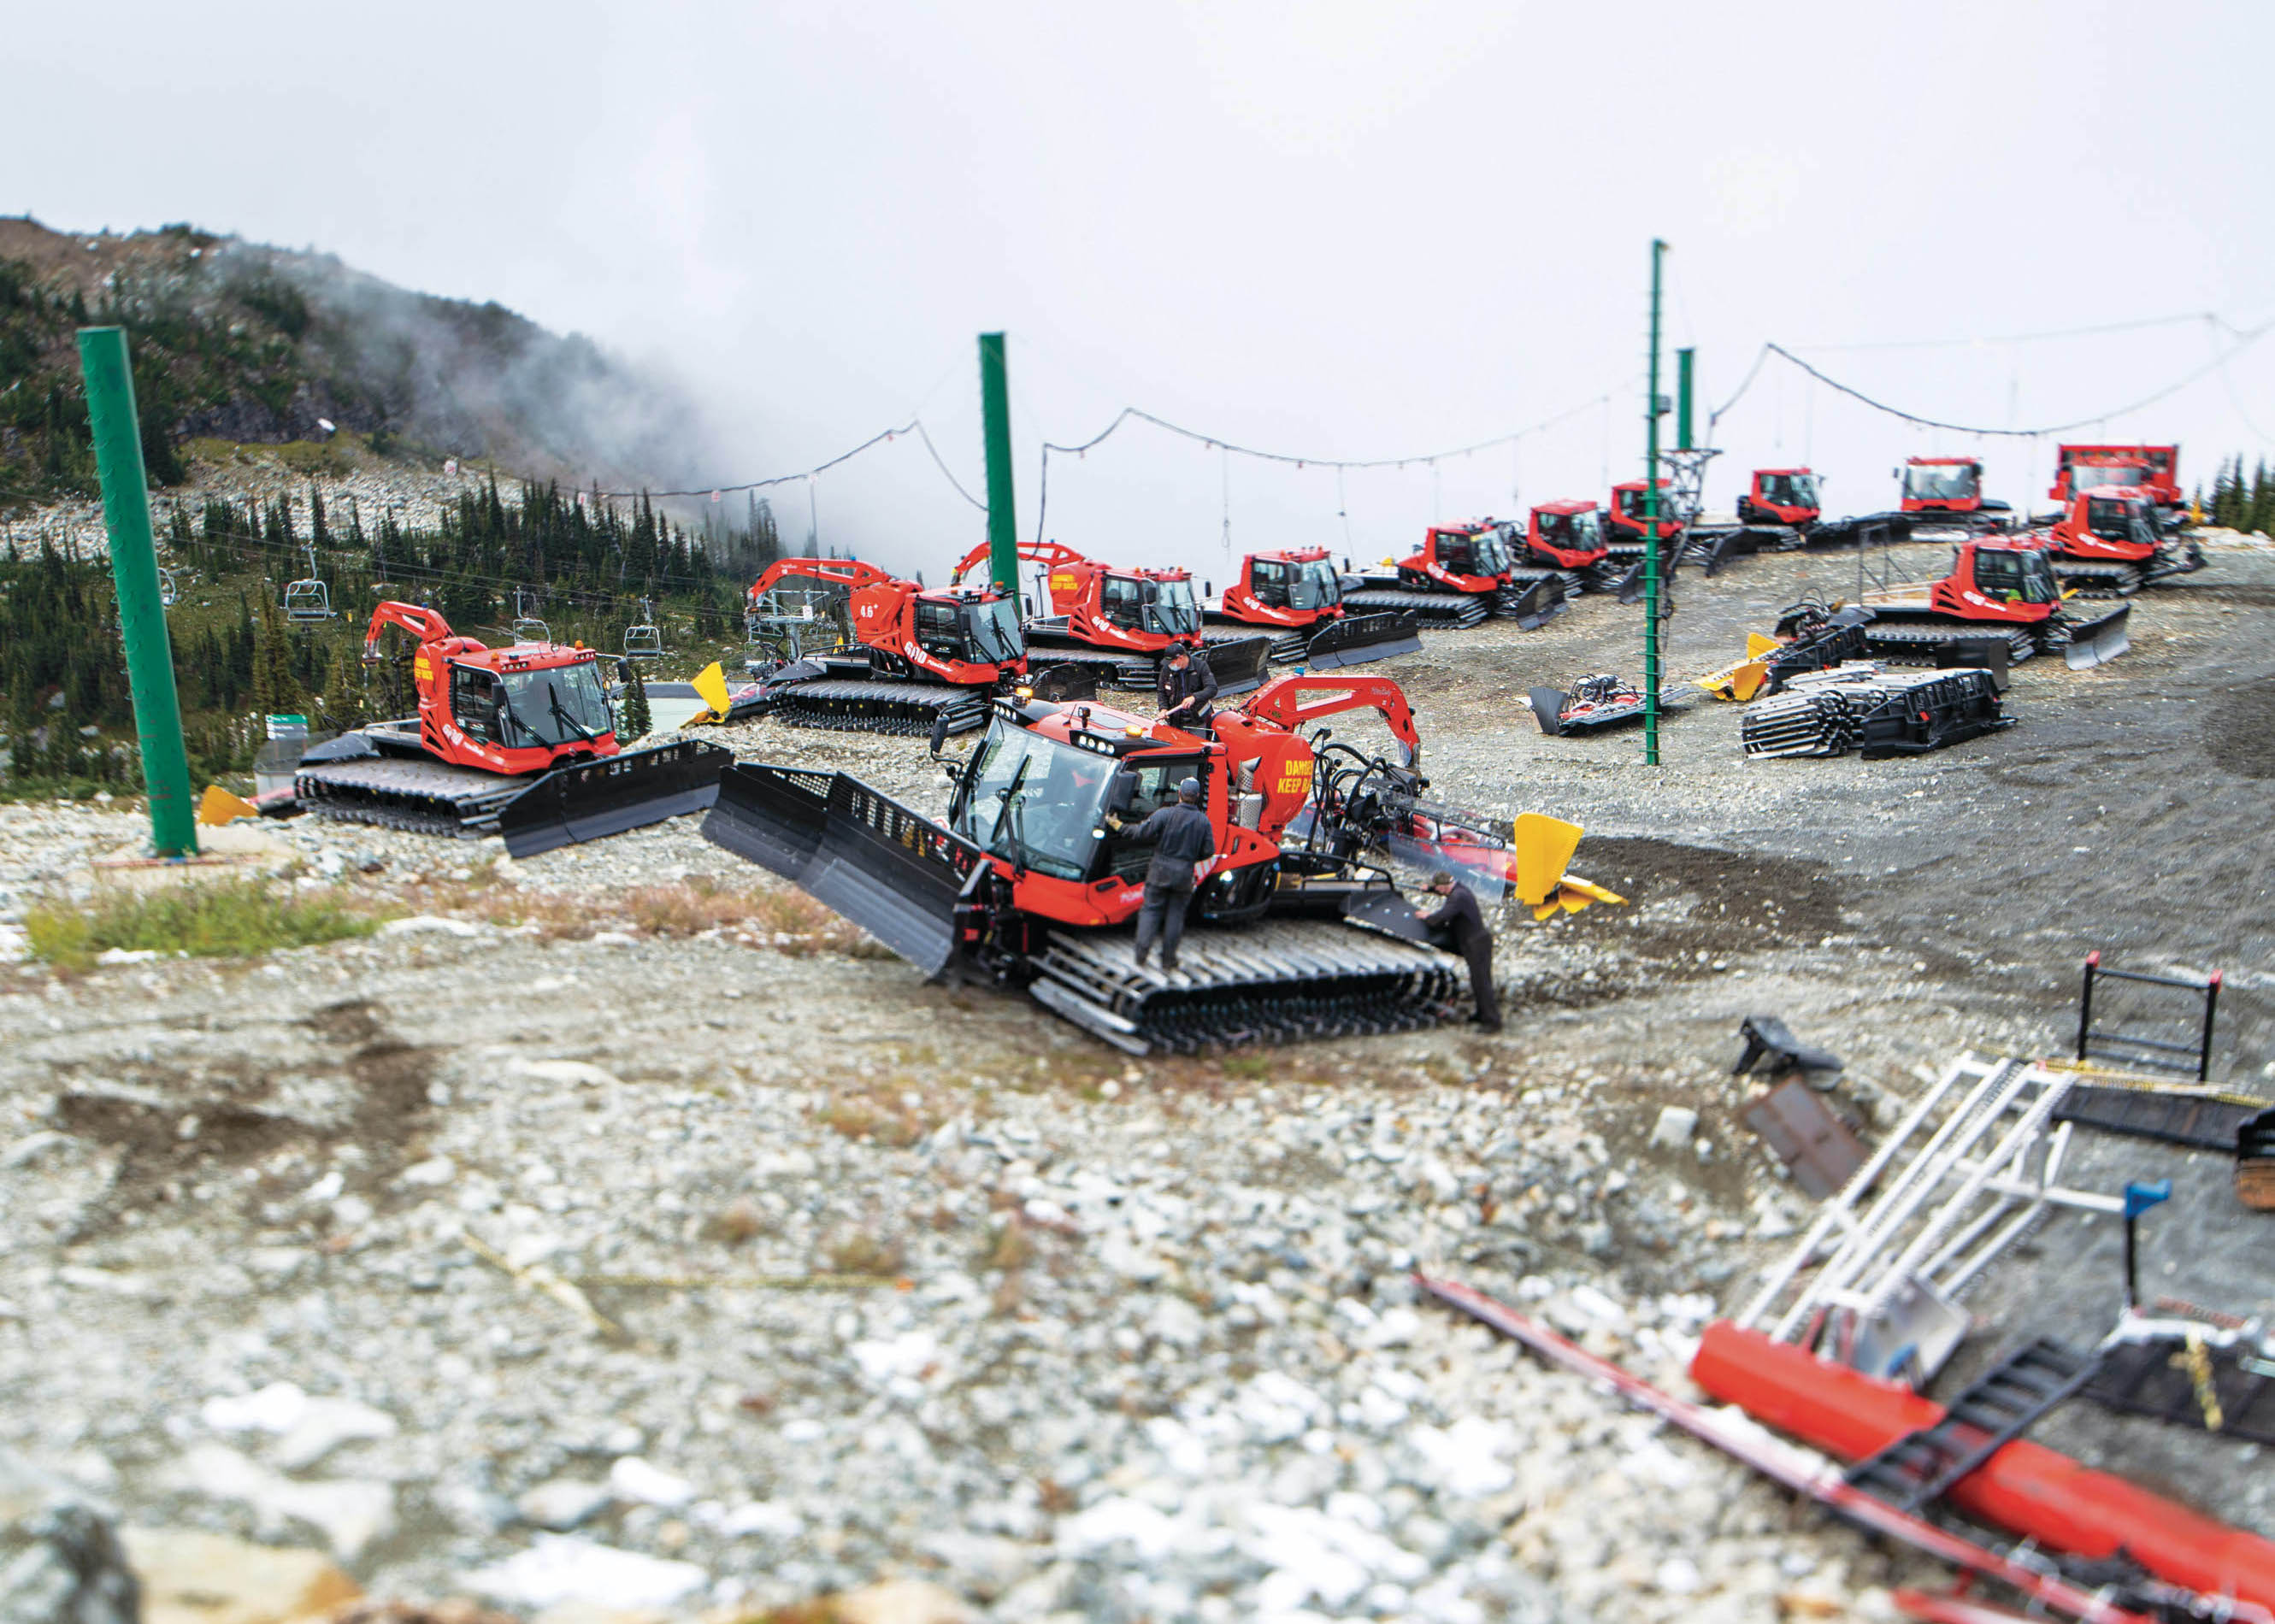 September 20, 2021 - Whistler, British Columbia - Crews work to maintain snow preparation machinery.  (Photograph by Jimmy Jeong)